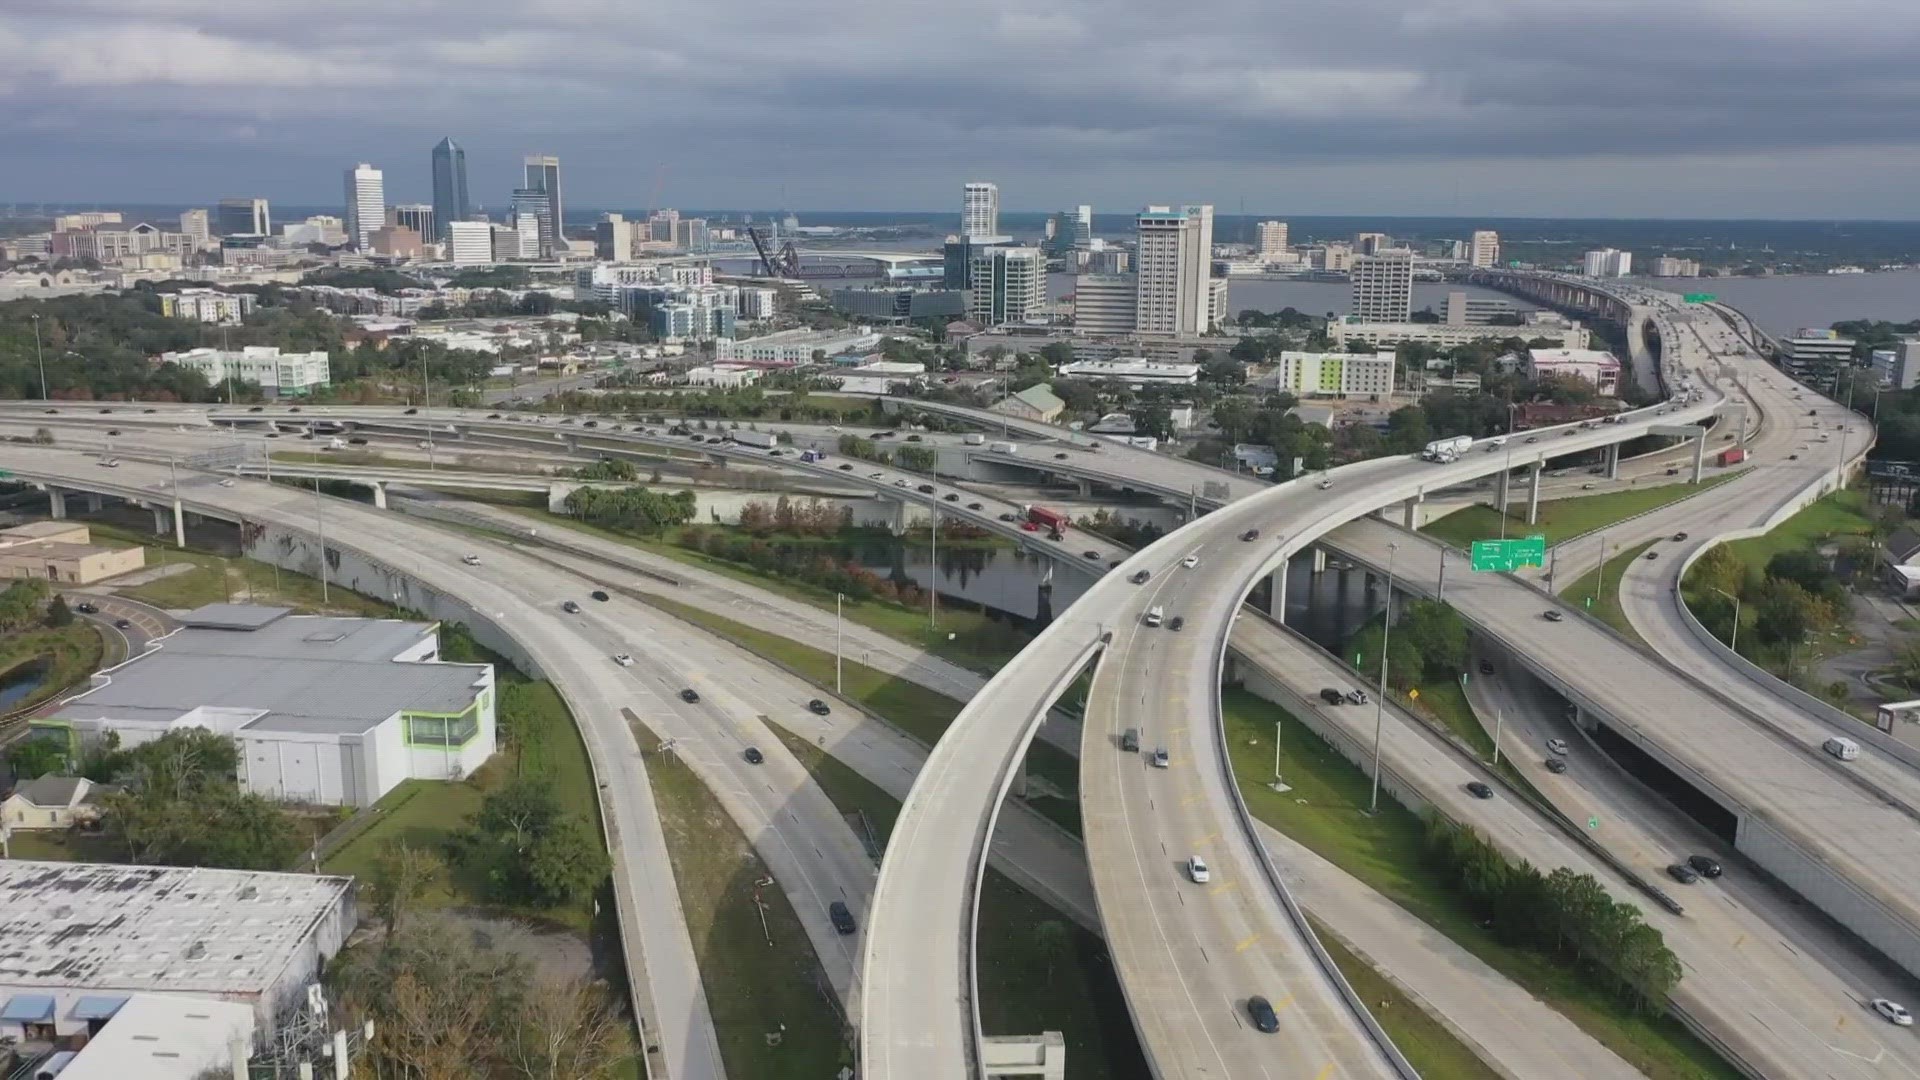 Several major roads in Jacksonville have seen their fair share of construction, as some navigation systems are working to catch up so drivers aren't confused.